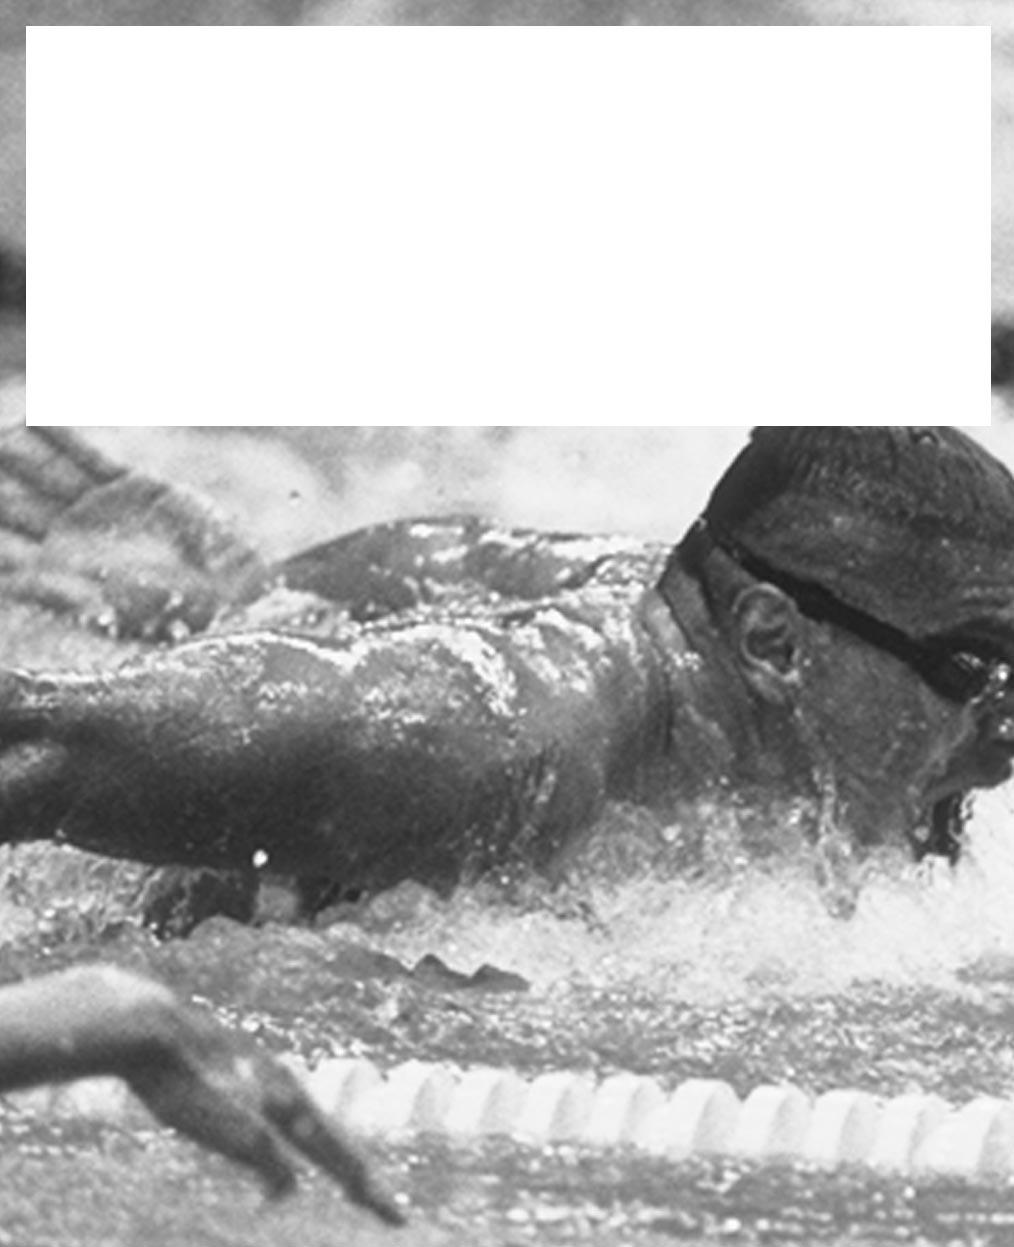 L A B 2 THE LIMIT OF SWIMMING SPEED Finding Limits It is often said in sports that records are made to be broken. This saying suggests there is no limit to athletic performance.